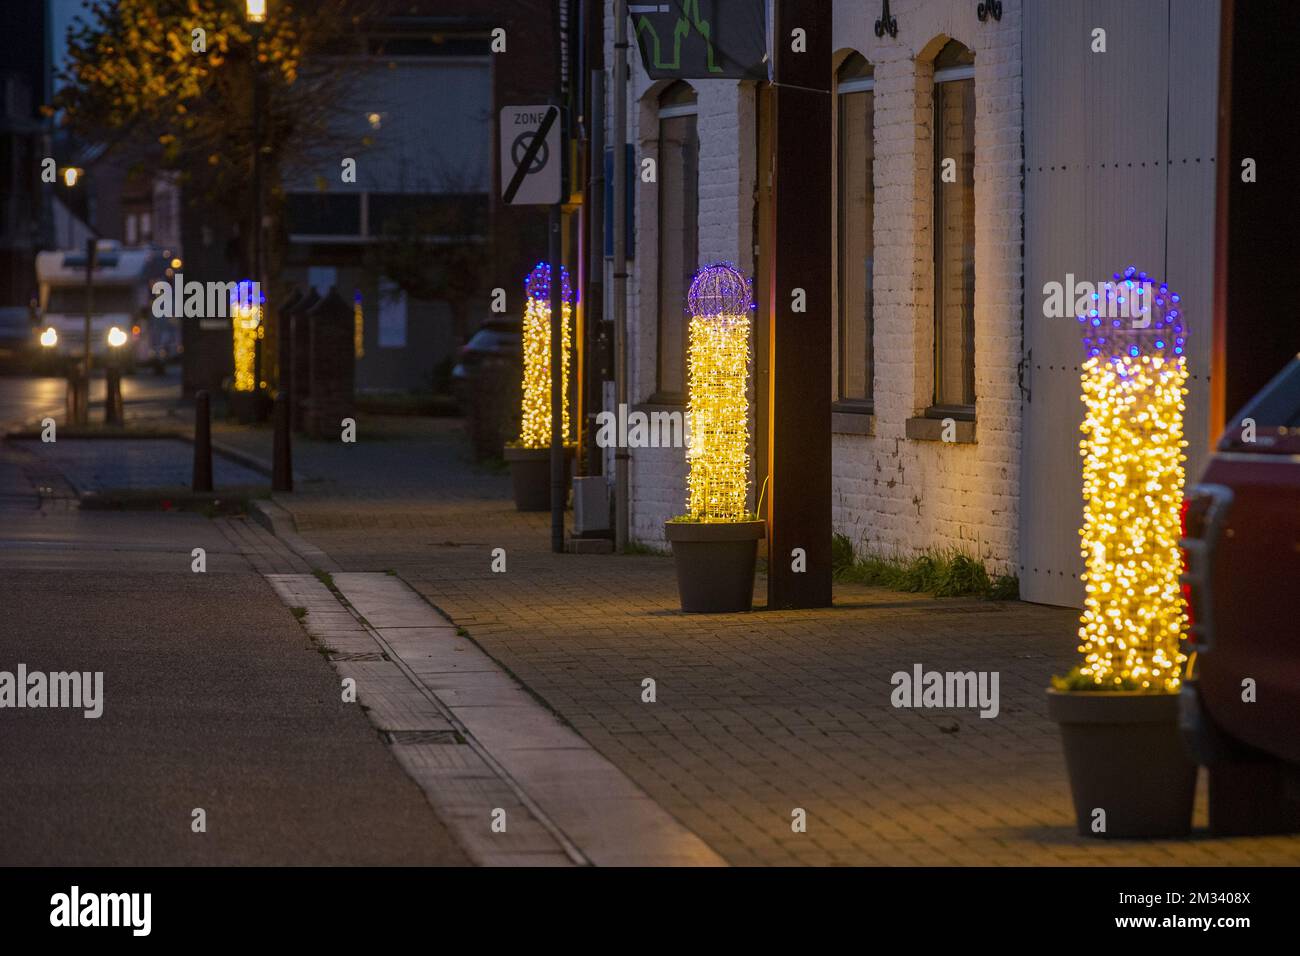 Illustration picture shows the phallic-shaped Christmas lights in Oudenburg, West-Flanders province, Friday 20 November 2020. The lights were supposed to resemble candles but with the blue dome shape on the top they look more like male genitalia. BELGA PHOTO NICOLAS MAETERLINCK Stock Photo